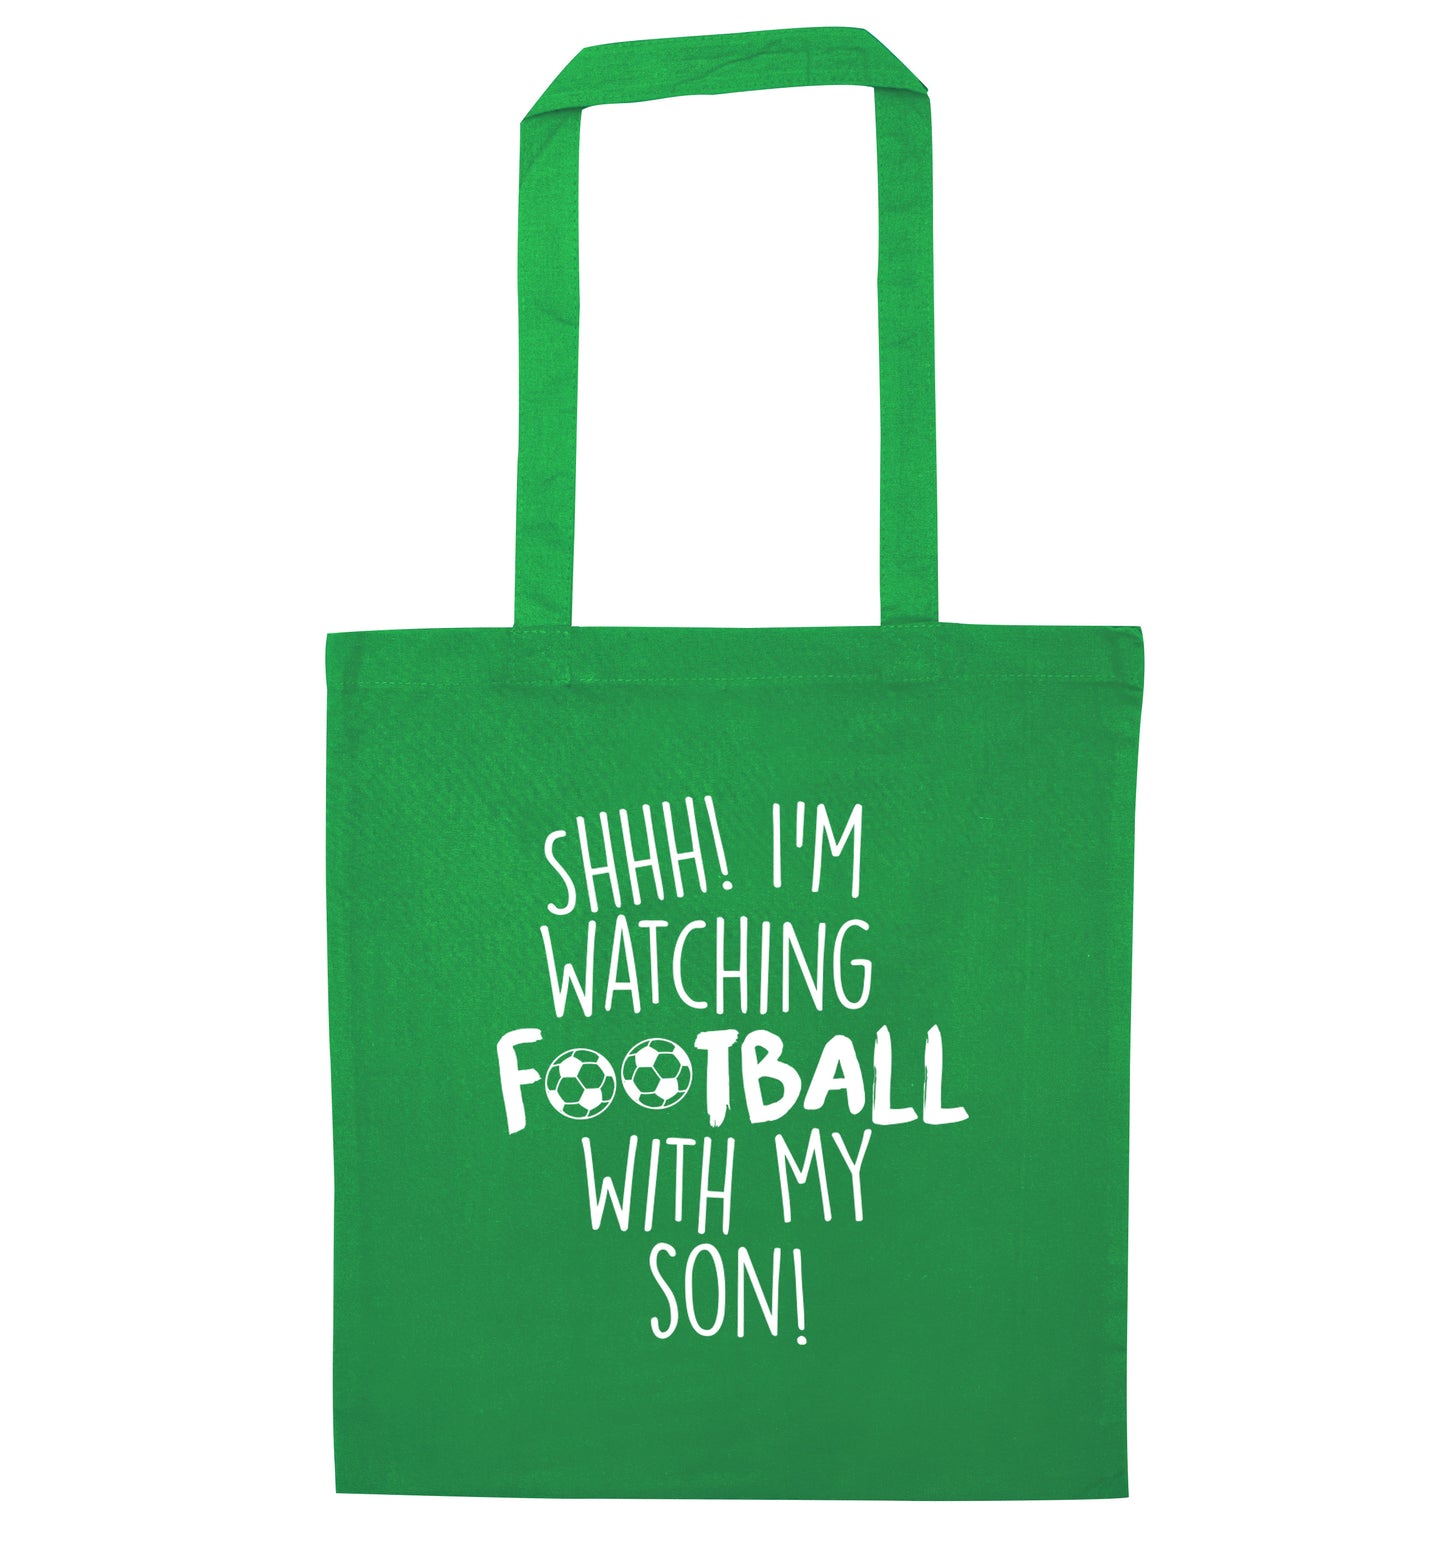 Shhh I'm watching football with my son green tote bag